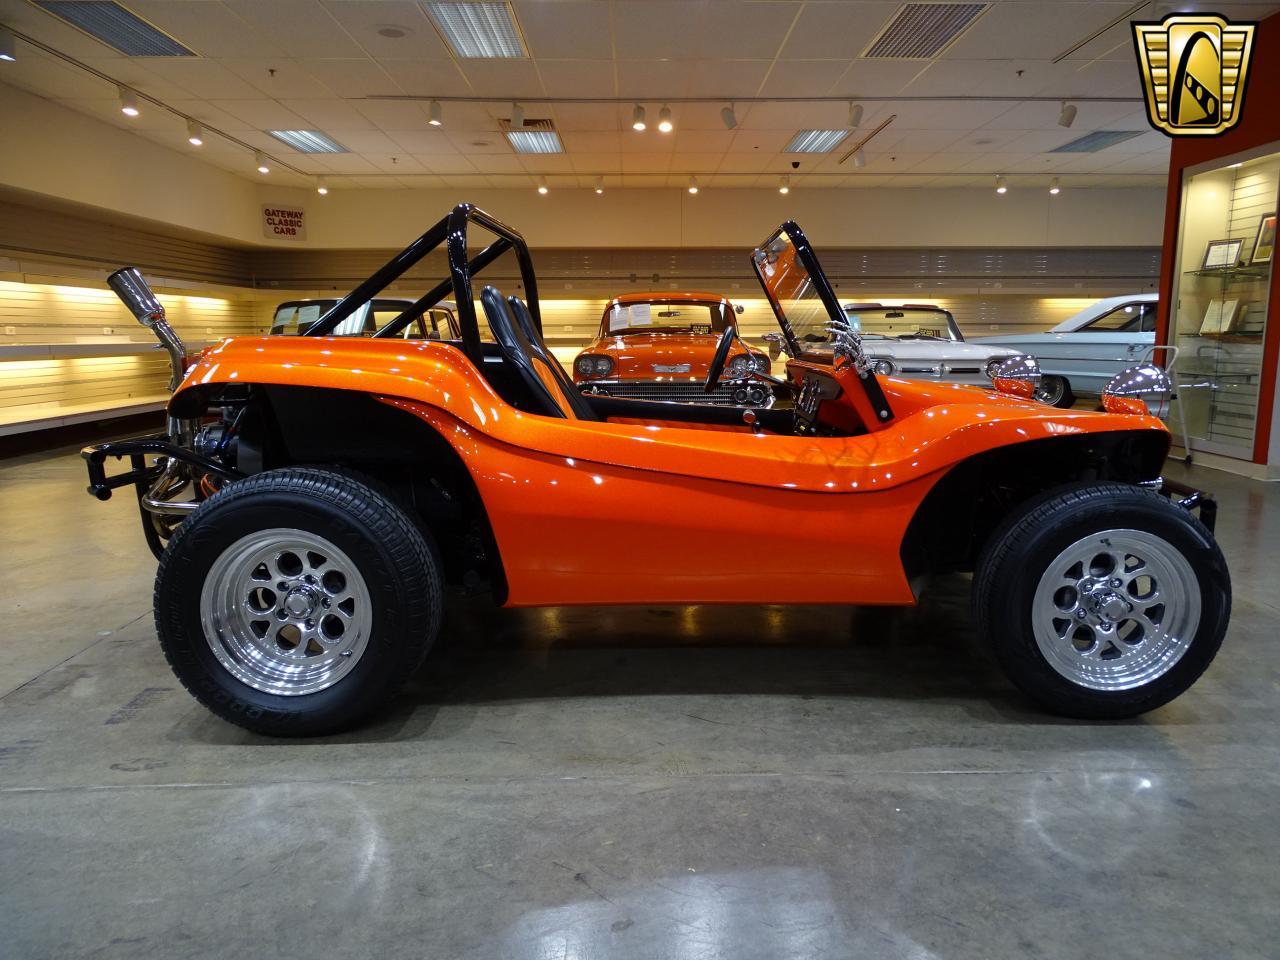 1969 Volkswagen Dune Buggy for Sale | ClassicCars.com | CC ...